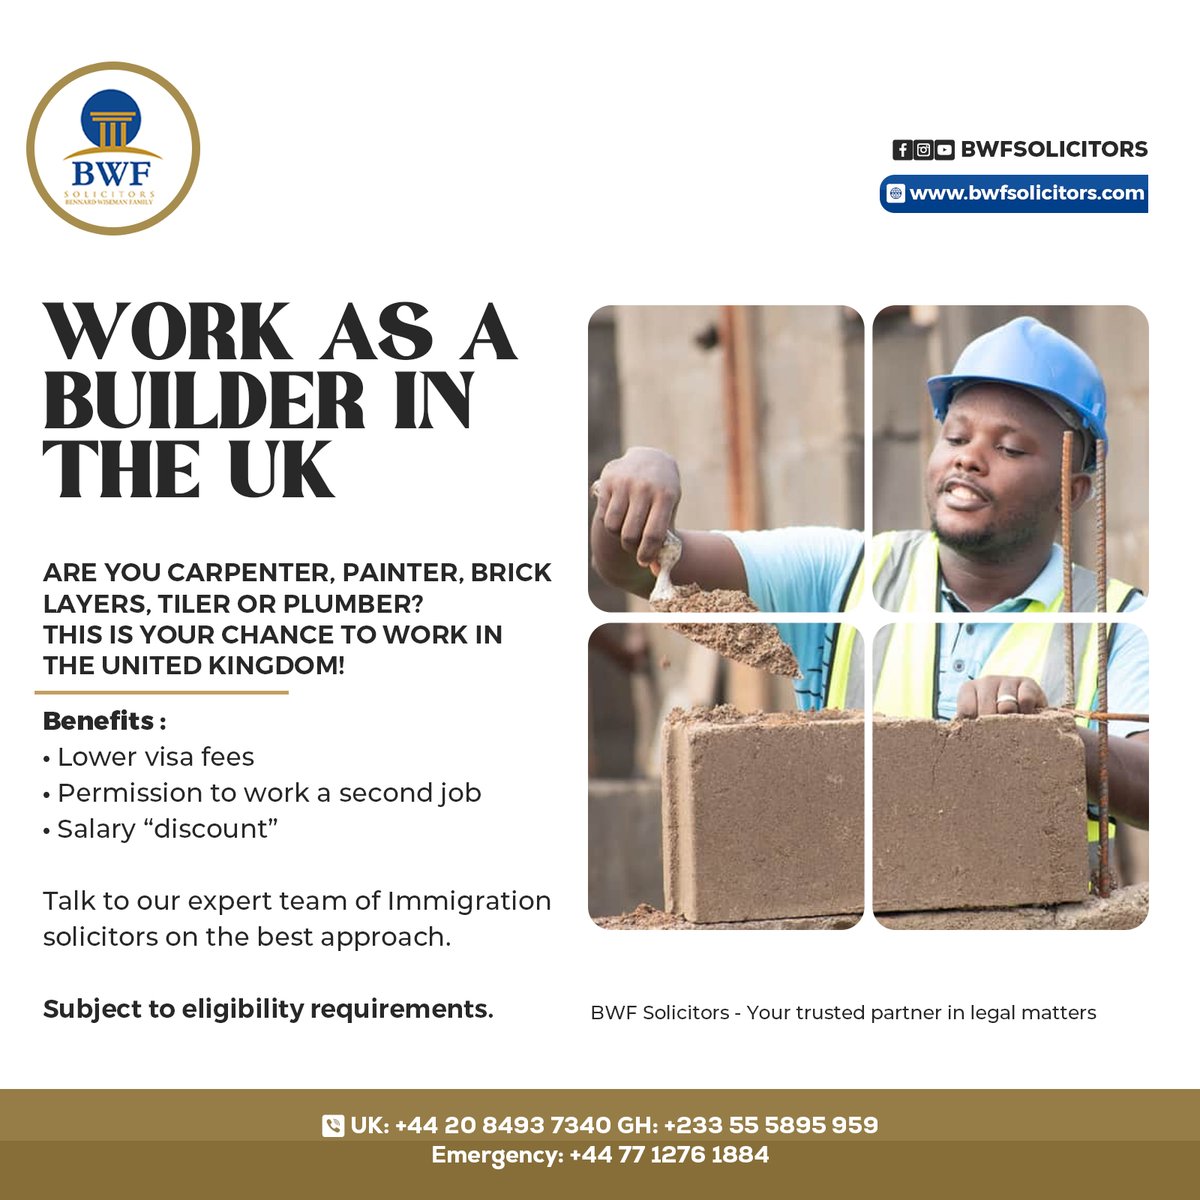 Carpenters, tilers, plumbers, painters - take advantage of this opportunity to live and work in the United Kingdom.
Call us for more information:
UK:        +44 20 8493 7340
Ghana:   +2335  5589 5959
admin@bwfsolicitors.com
bwfsolicitors.com
#ukmigrantlaws #ukghana #ukvisa